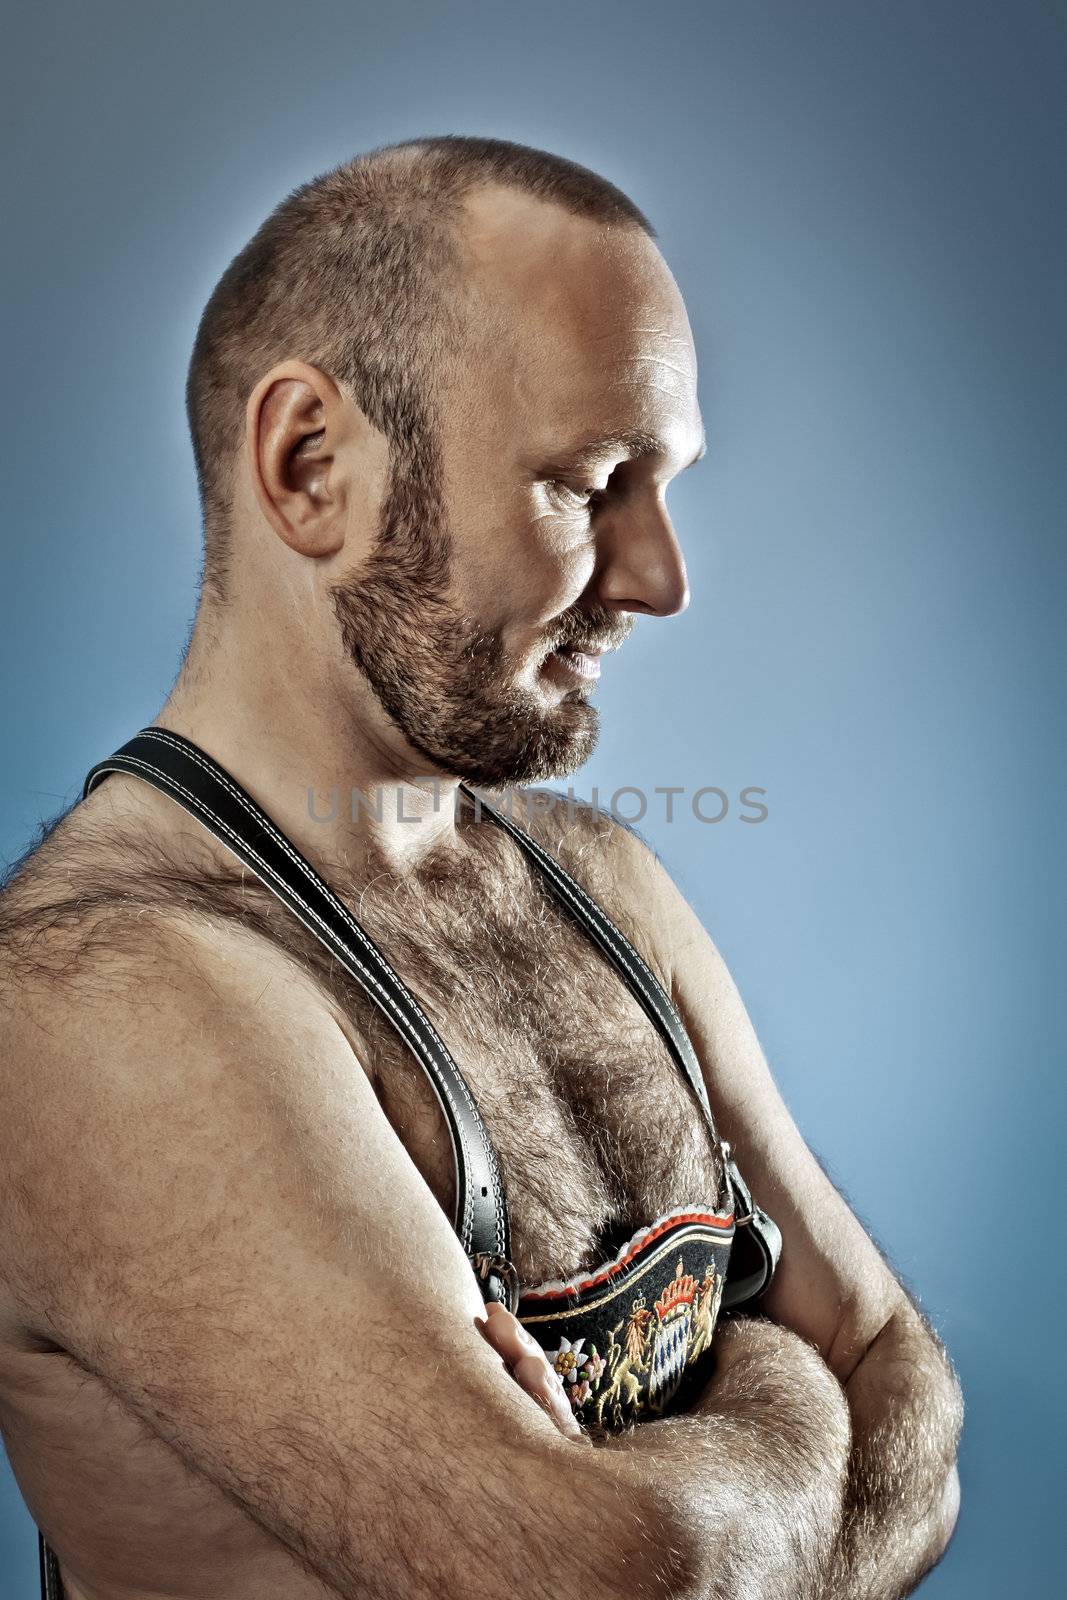 An image of a hairy man with a beard